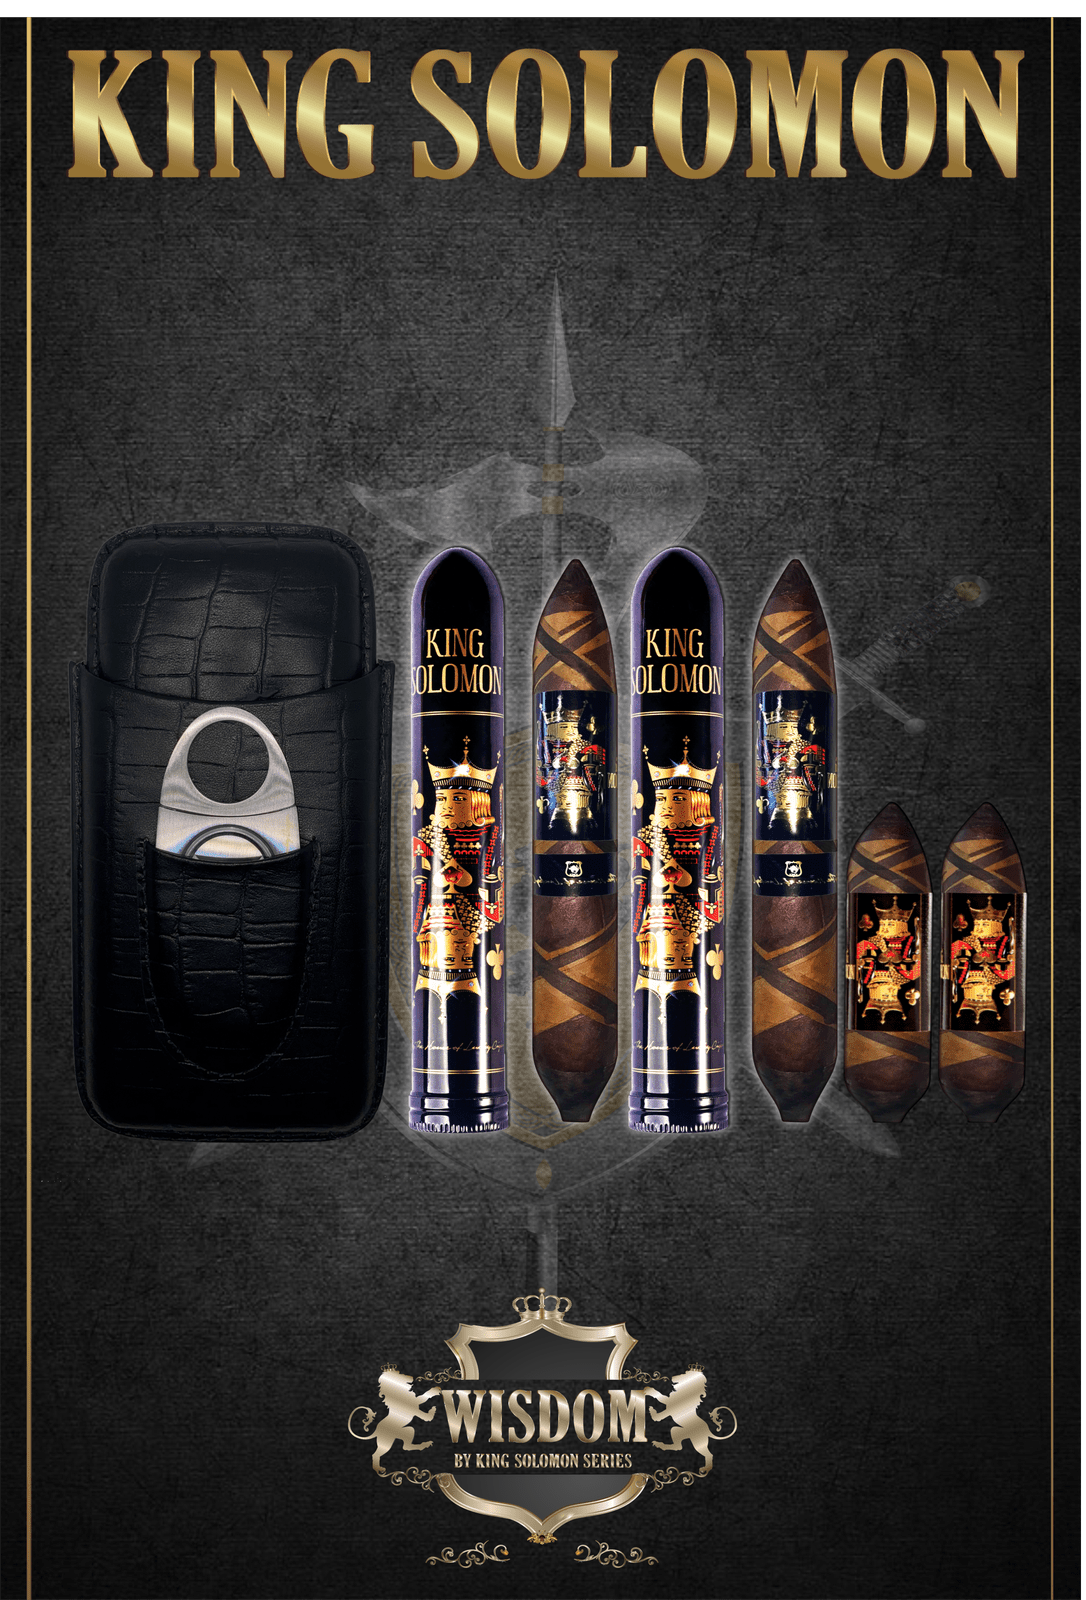 Wisdom 4x60 Cigar From The King Solomon Series: Set of 2 and 2 King Solomon 7x58 Cigar with Travel Humidor and Lighter